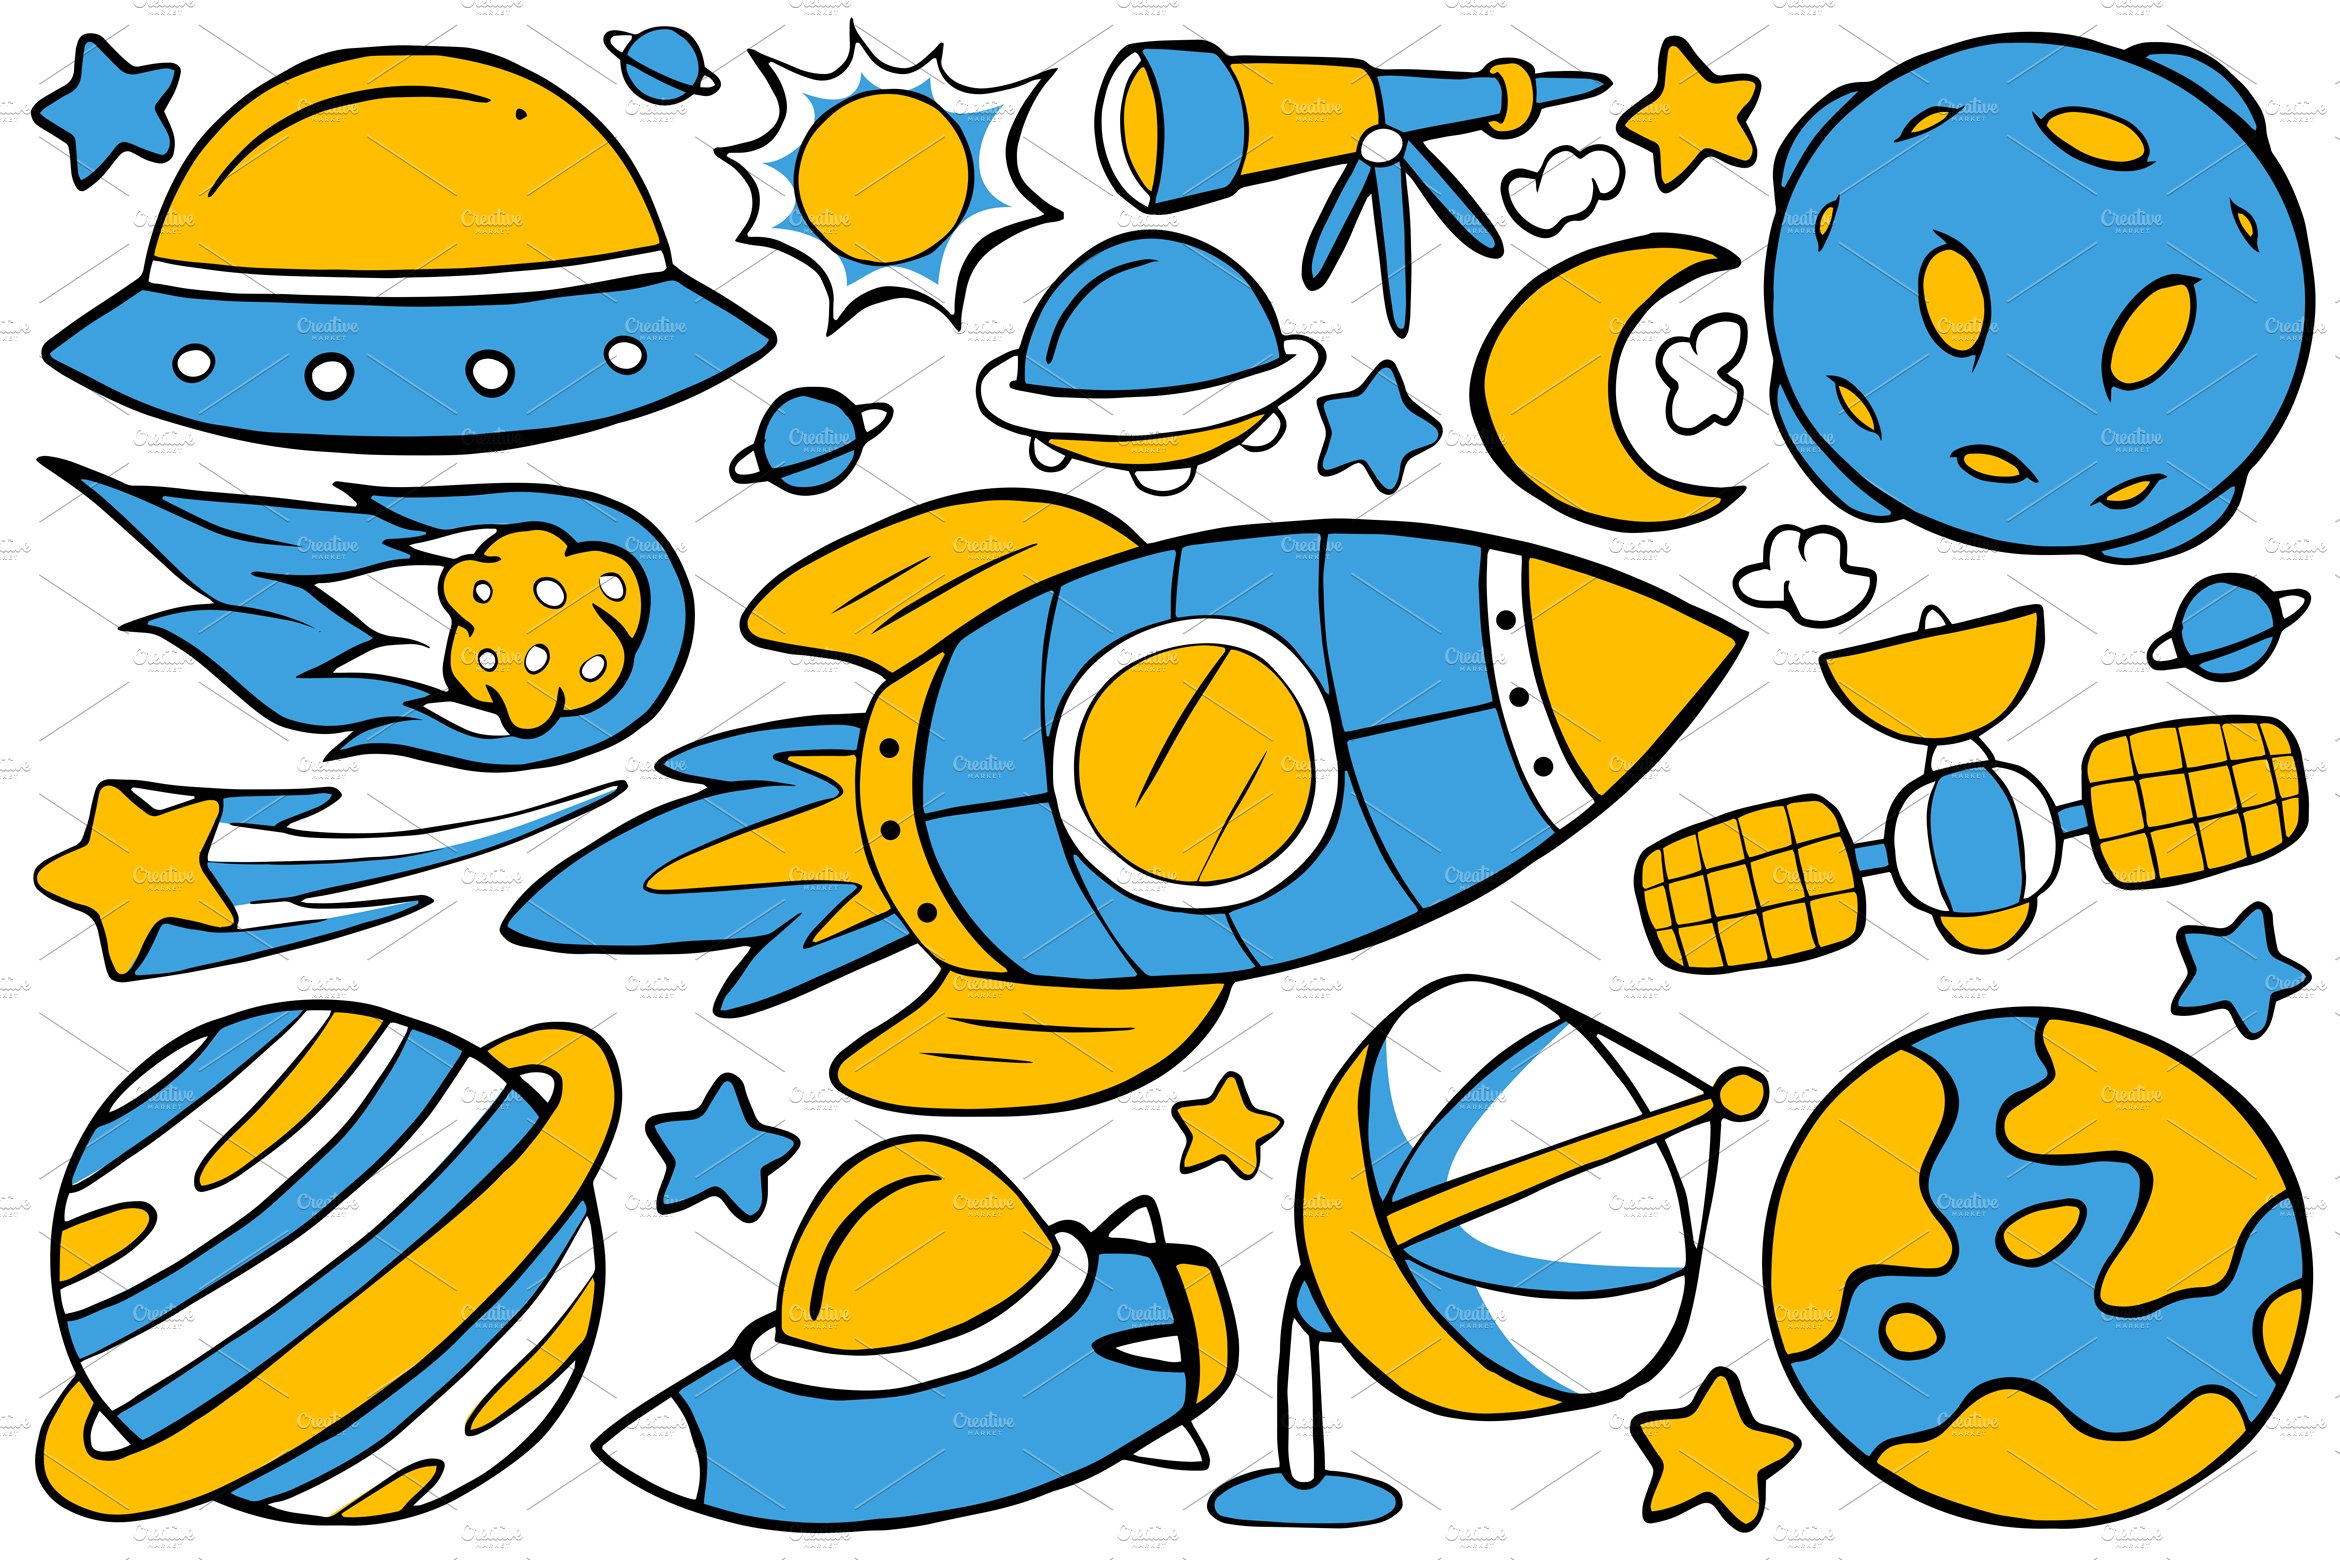 Space Doodle Vector Pack cover image.